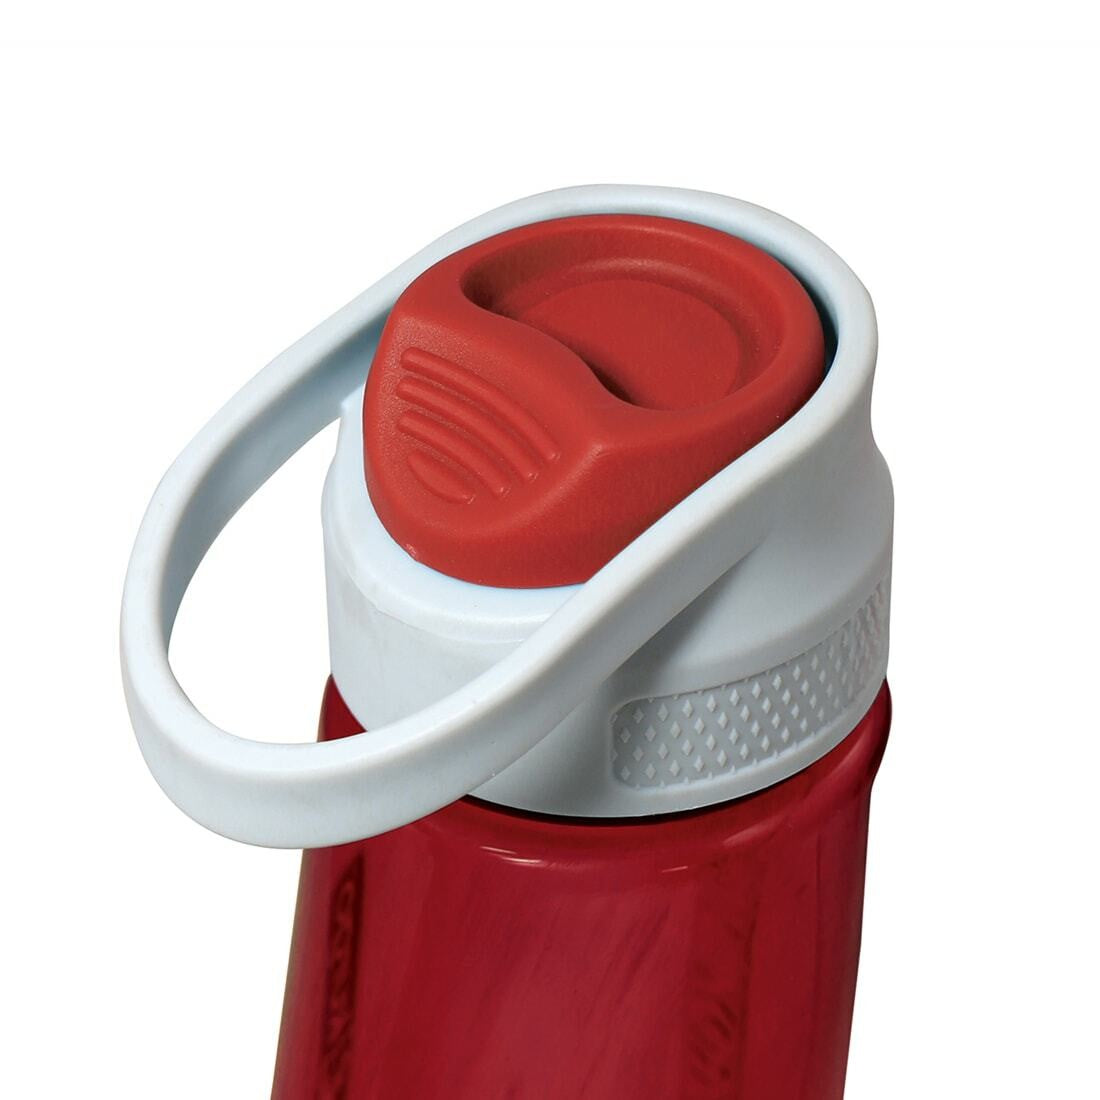 Close-up view of a red water bottle's top with white lid.